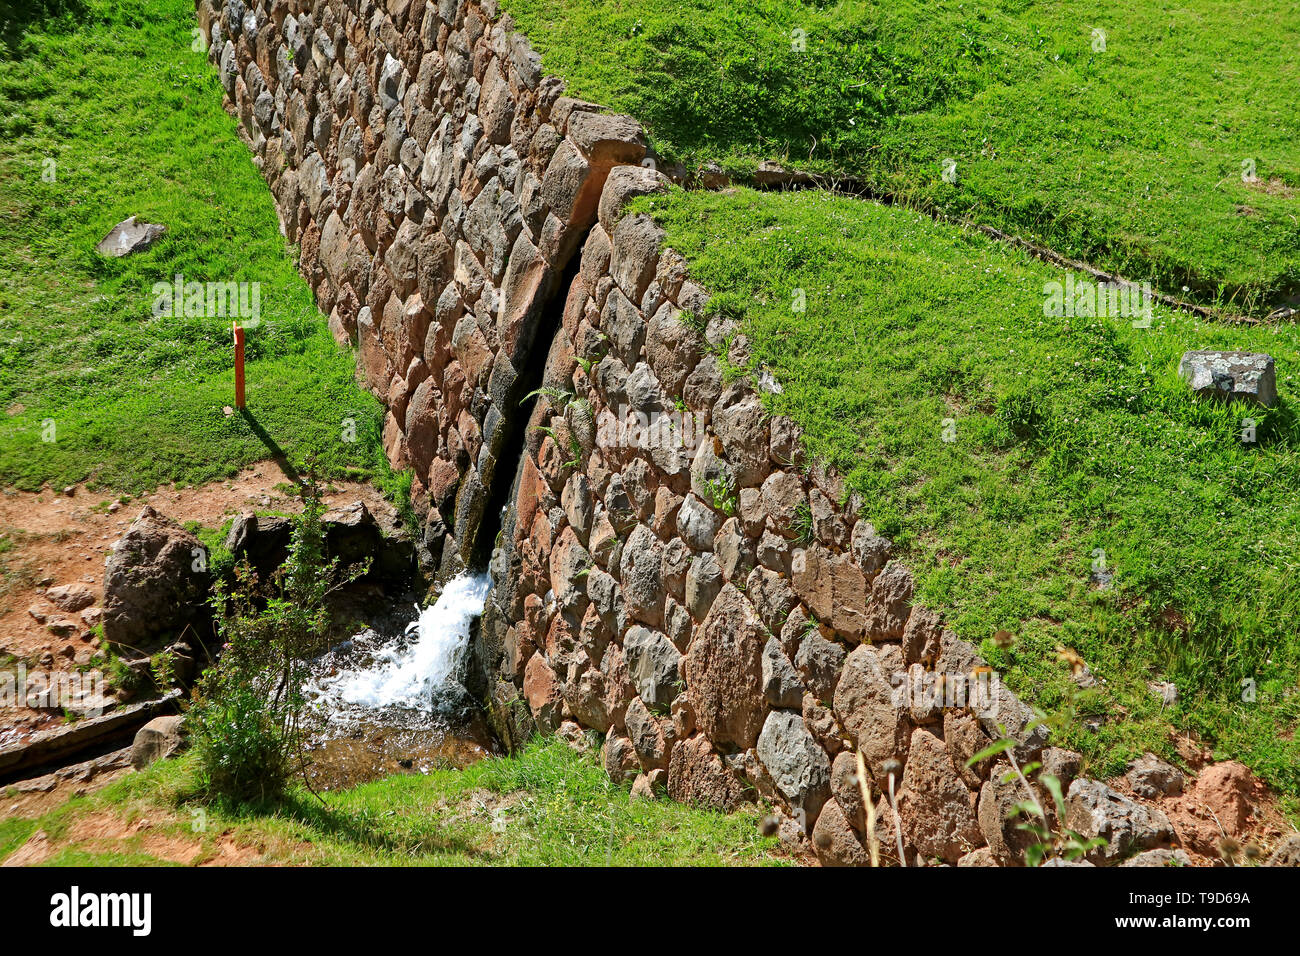 Natural Outdoor Water Channels of Tipon, Archaeological site in the Sacred Valley of the Inca, Cusco region, Peru, South America Stock Photo